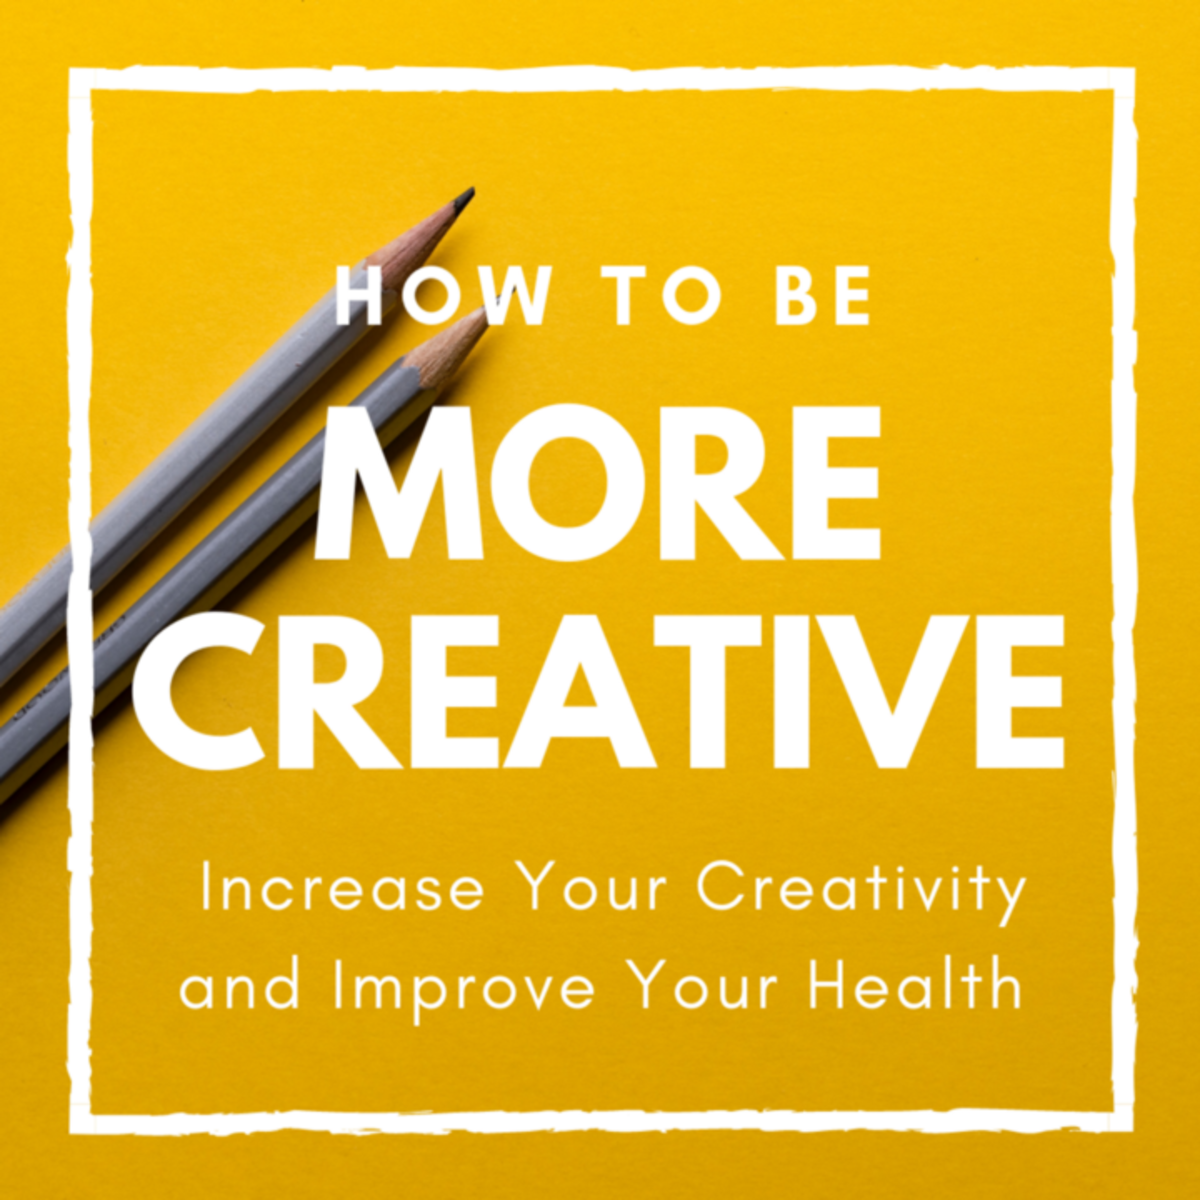 Learn how to increase your creativity — you’ll be happier and healthier. 